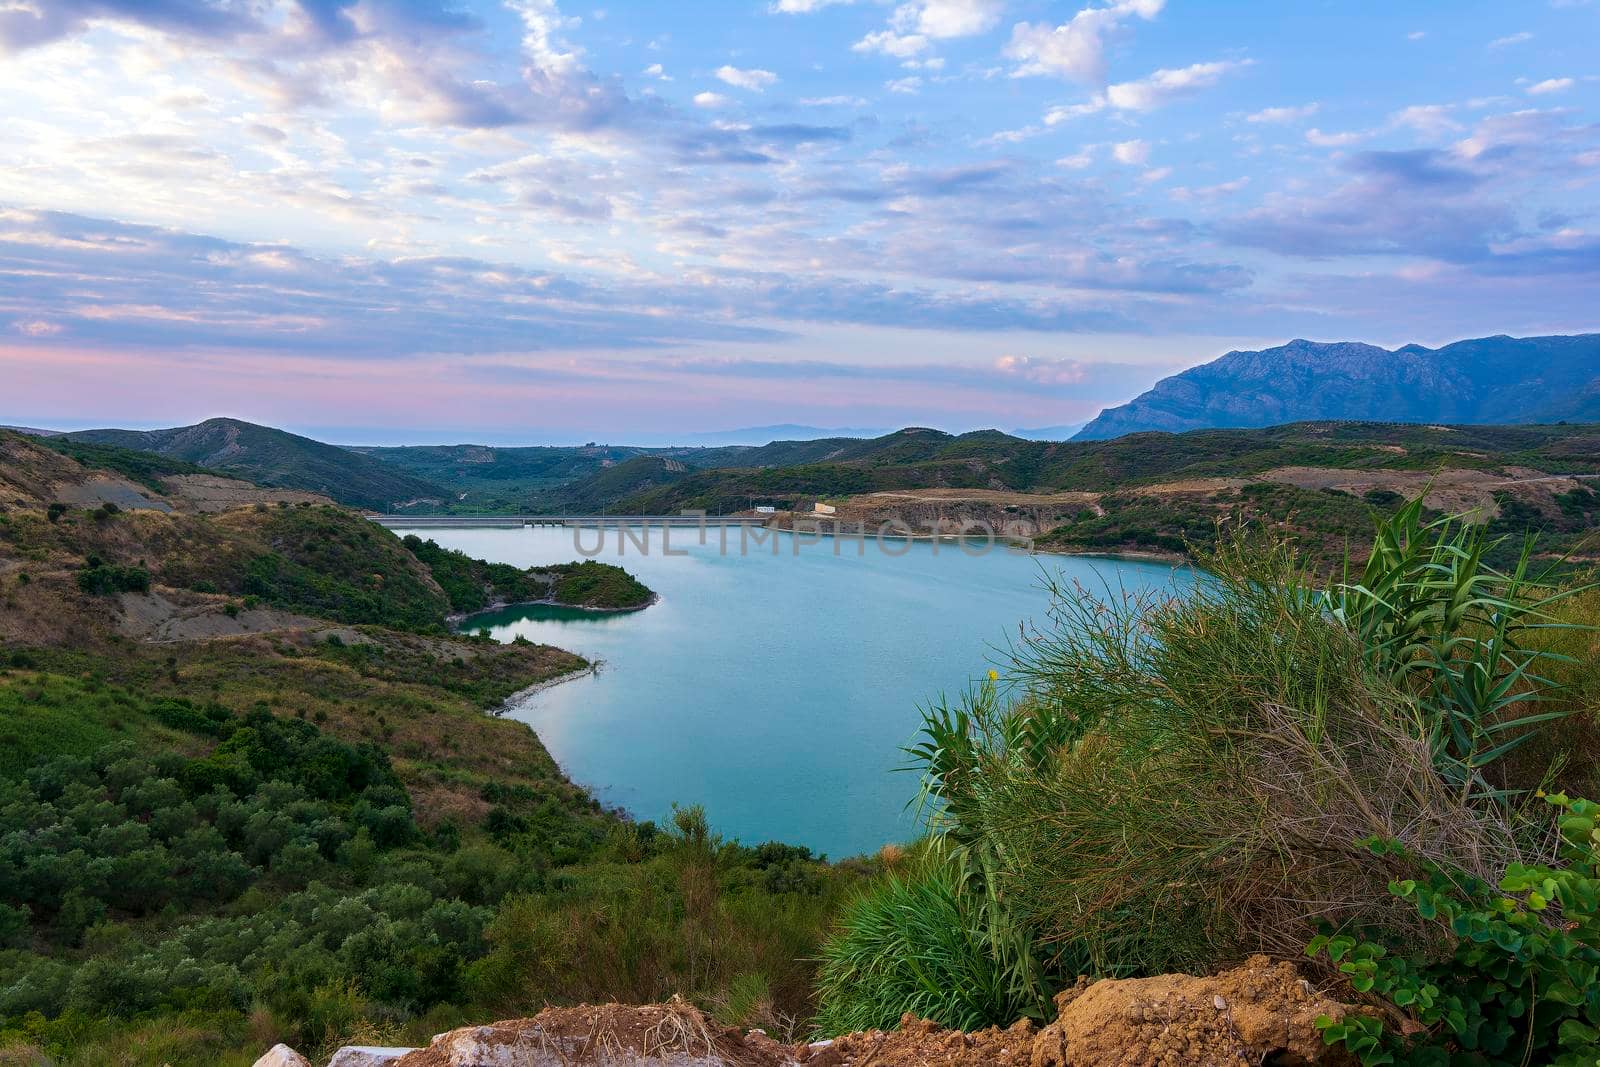 Christianoupolis dam water reservoir in Messenia, Greece. View of the dam, artificial lake. by ankarb